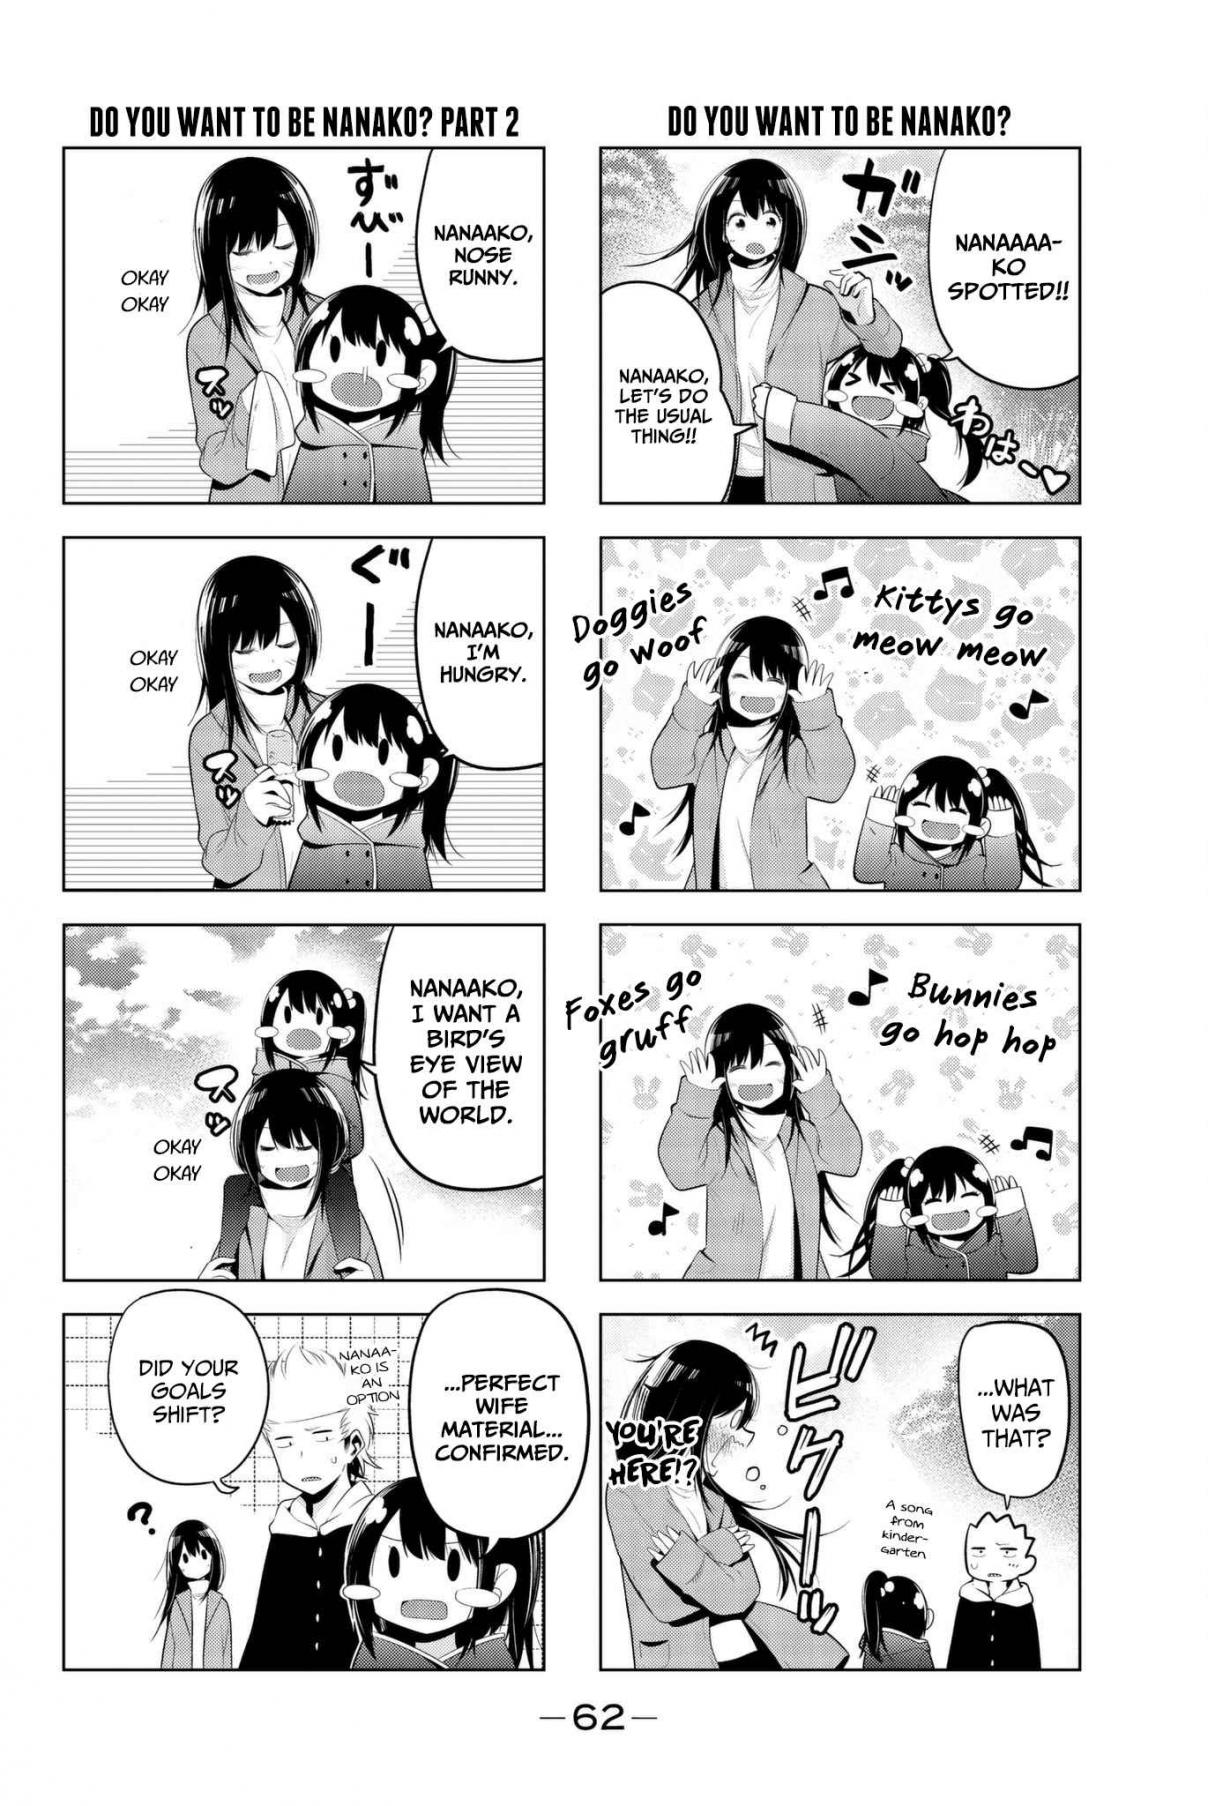 Senryu Girl Vol. 5 Ch. 71 Let's go find an adult you want to become!